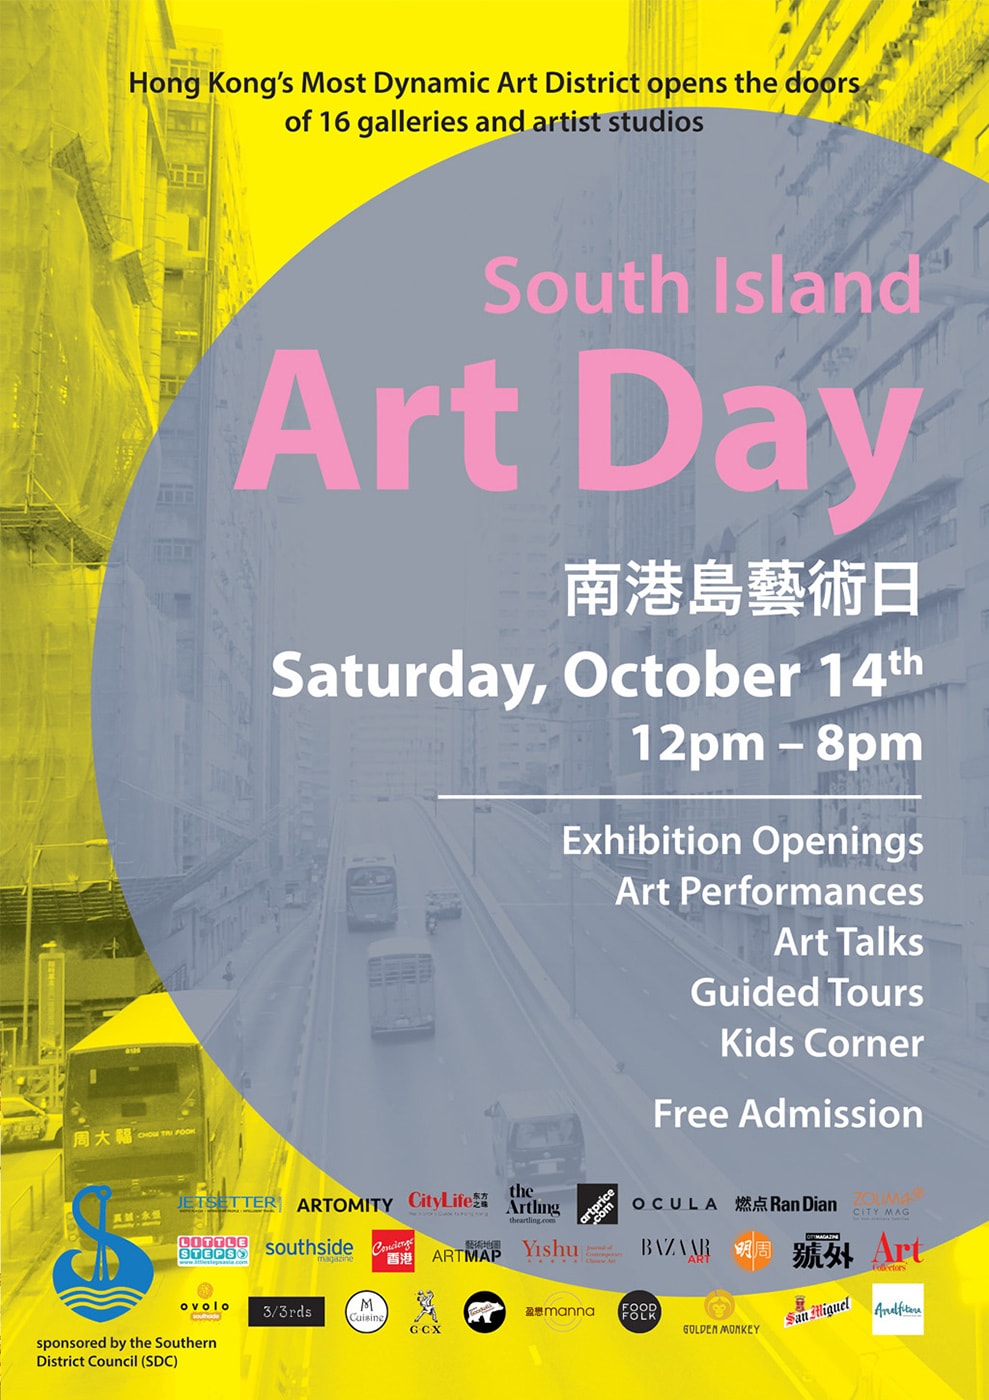 South Island Art Day will take place on Saturday, October 14, from 12 – 8pm